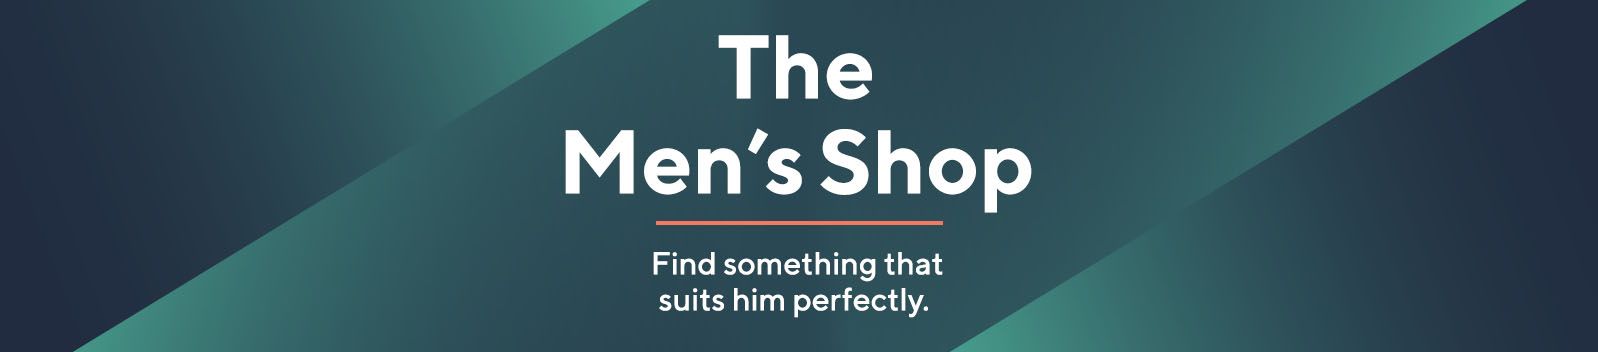 The Men's Shop: Find something that suits him perfectly. 